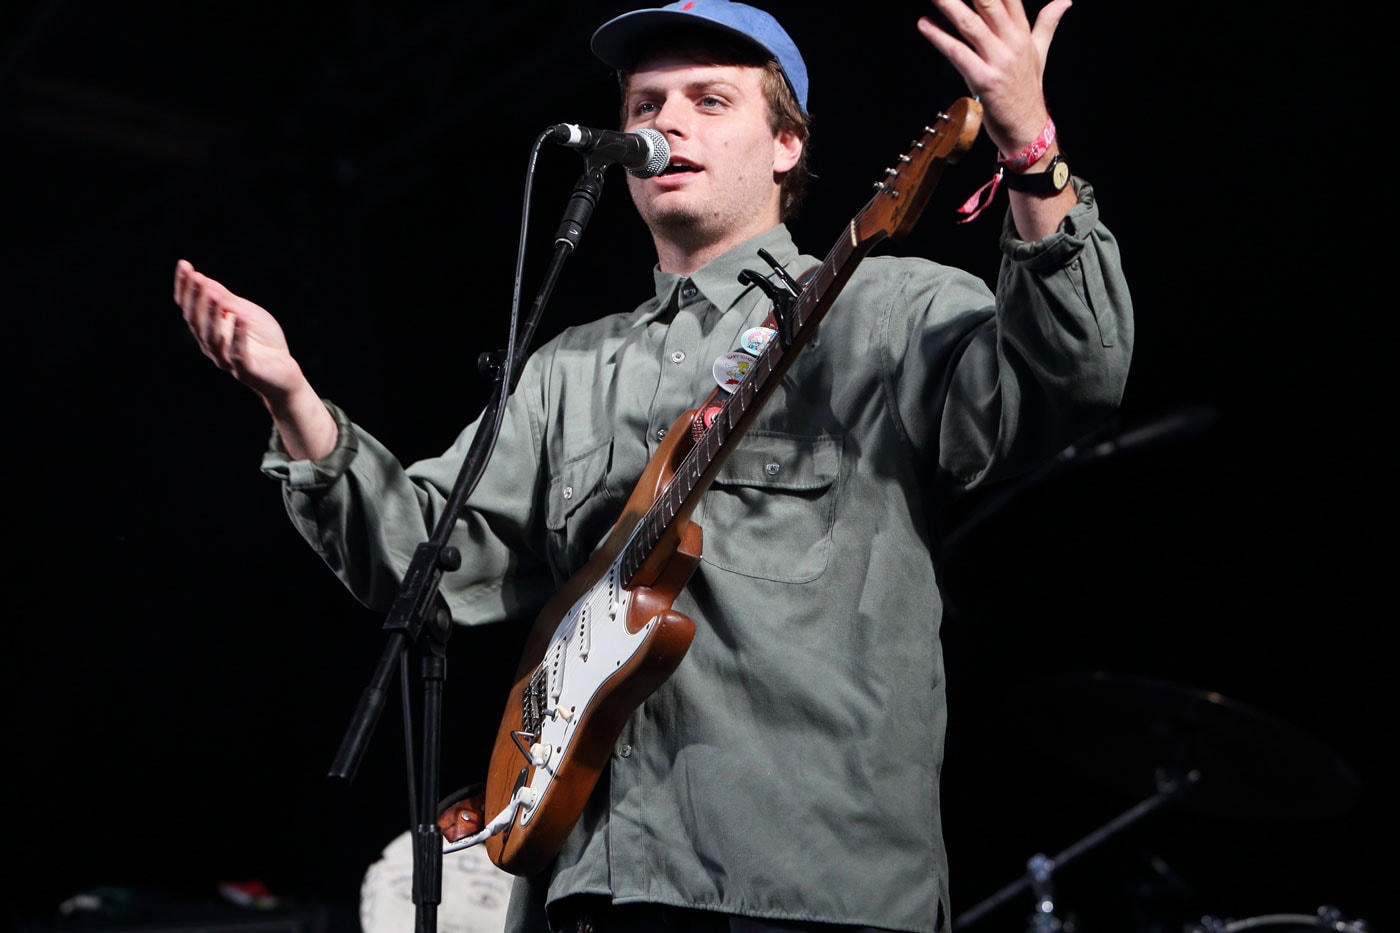 Mac DeMarco Covers Eric Clapton's "Change The World"